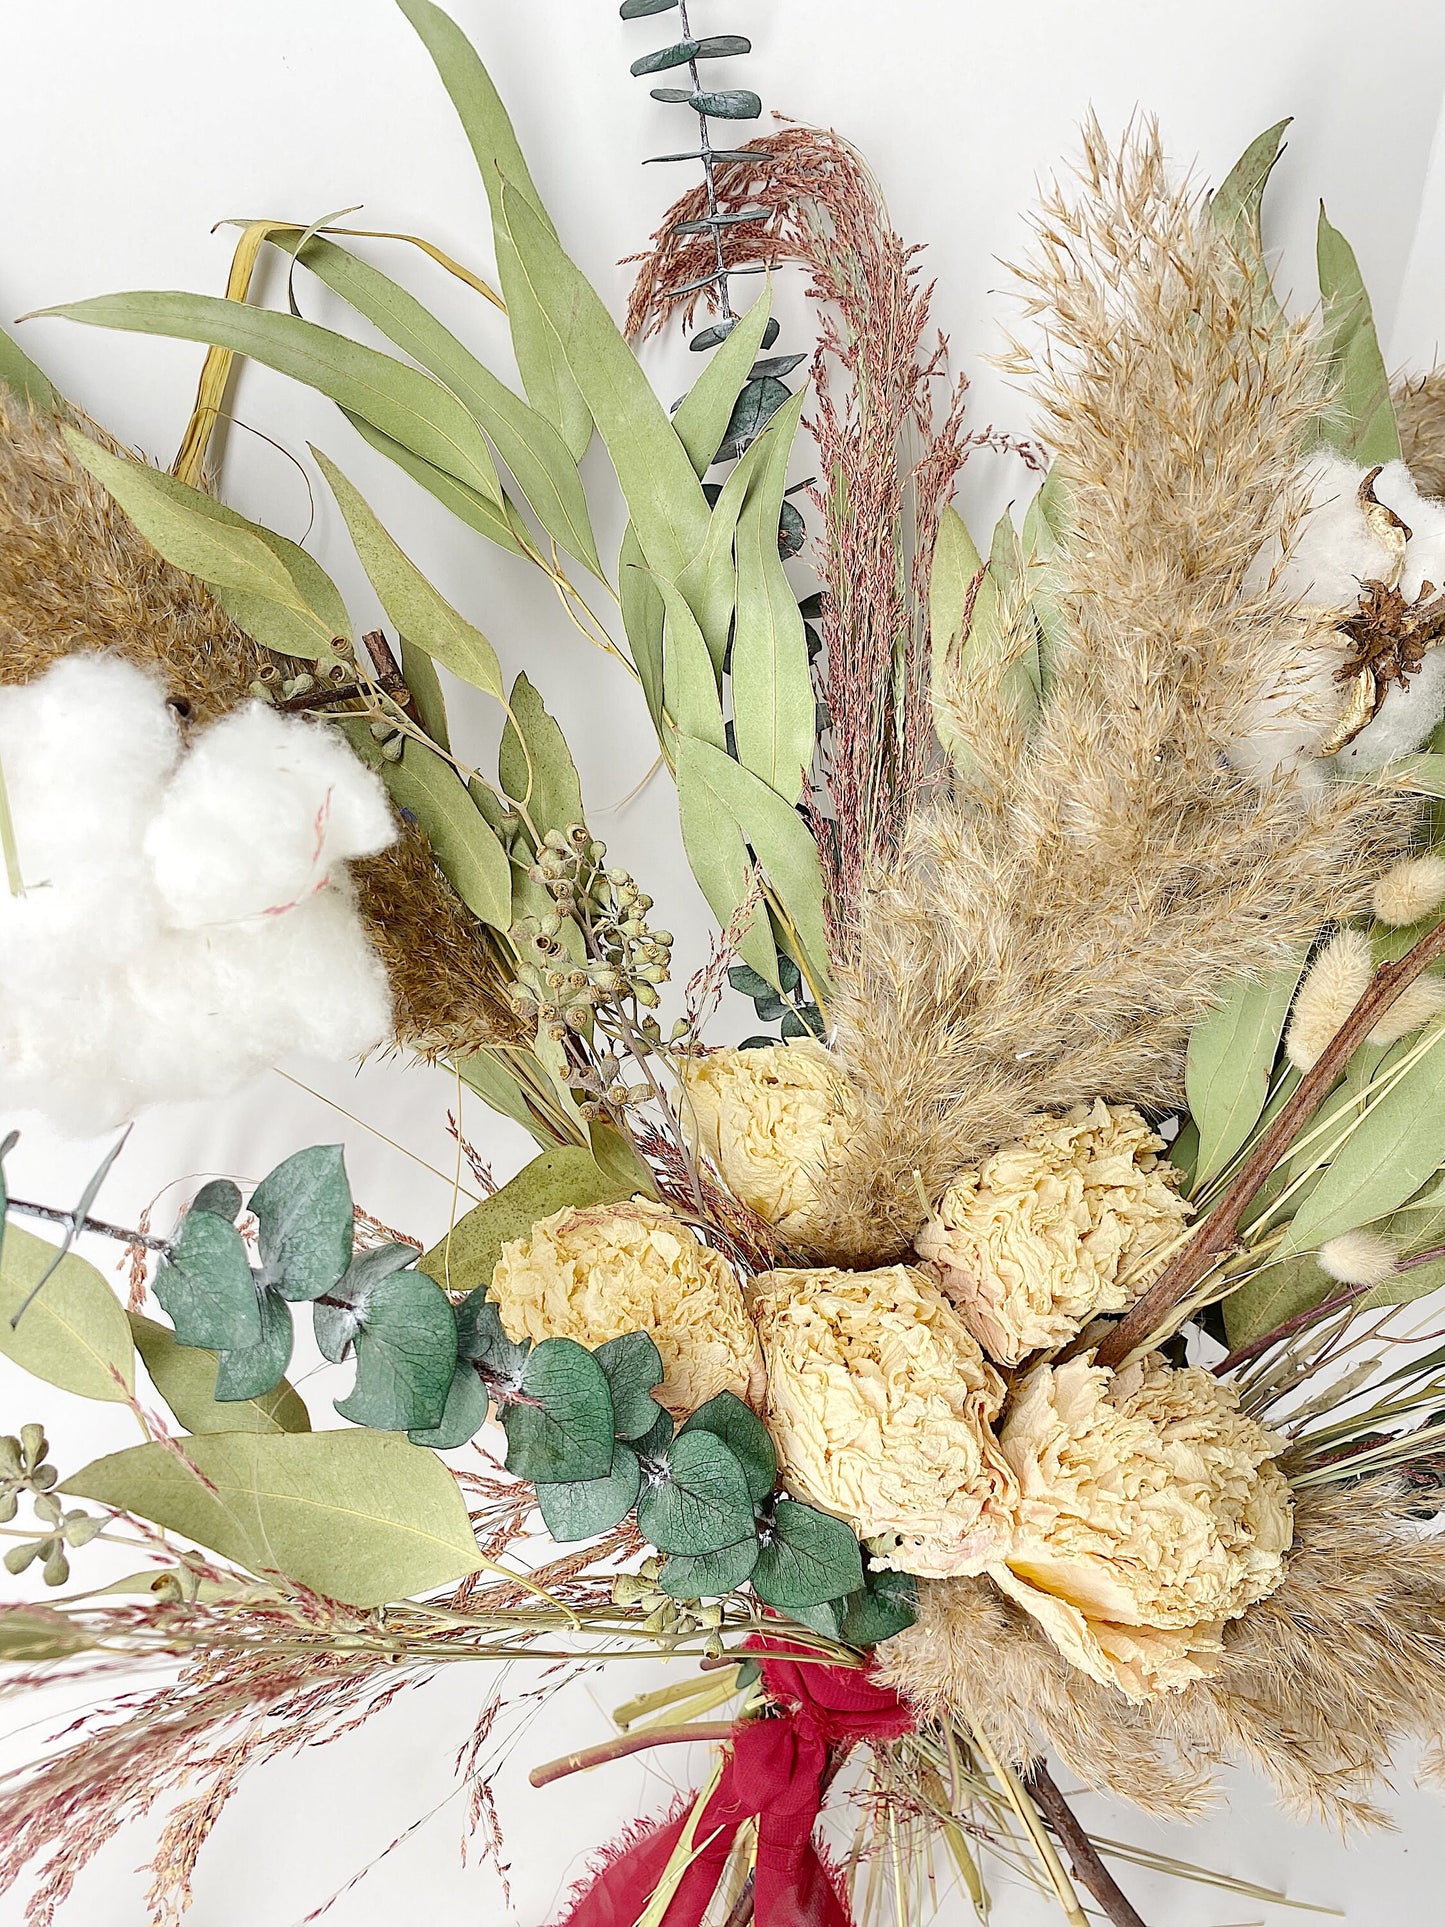 Extra Large Wedding Bouquet, Green White Bridal, Cotton, Peonies, Preserved Flowers, Dried Flowers, Pampas Grass, Modern, Decor, Bunny Tails